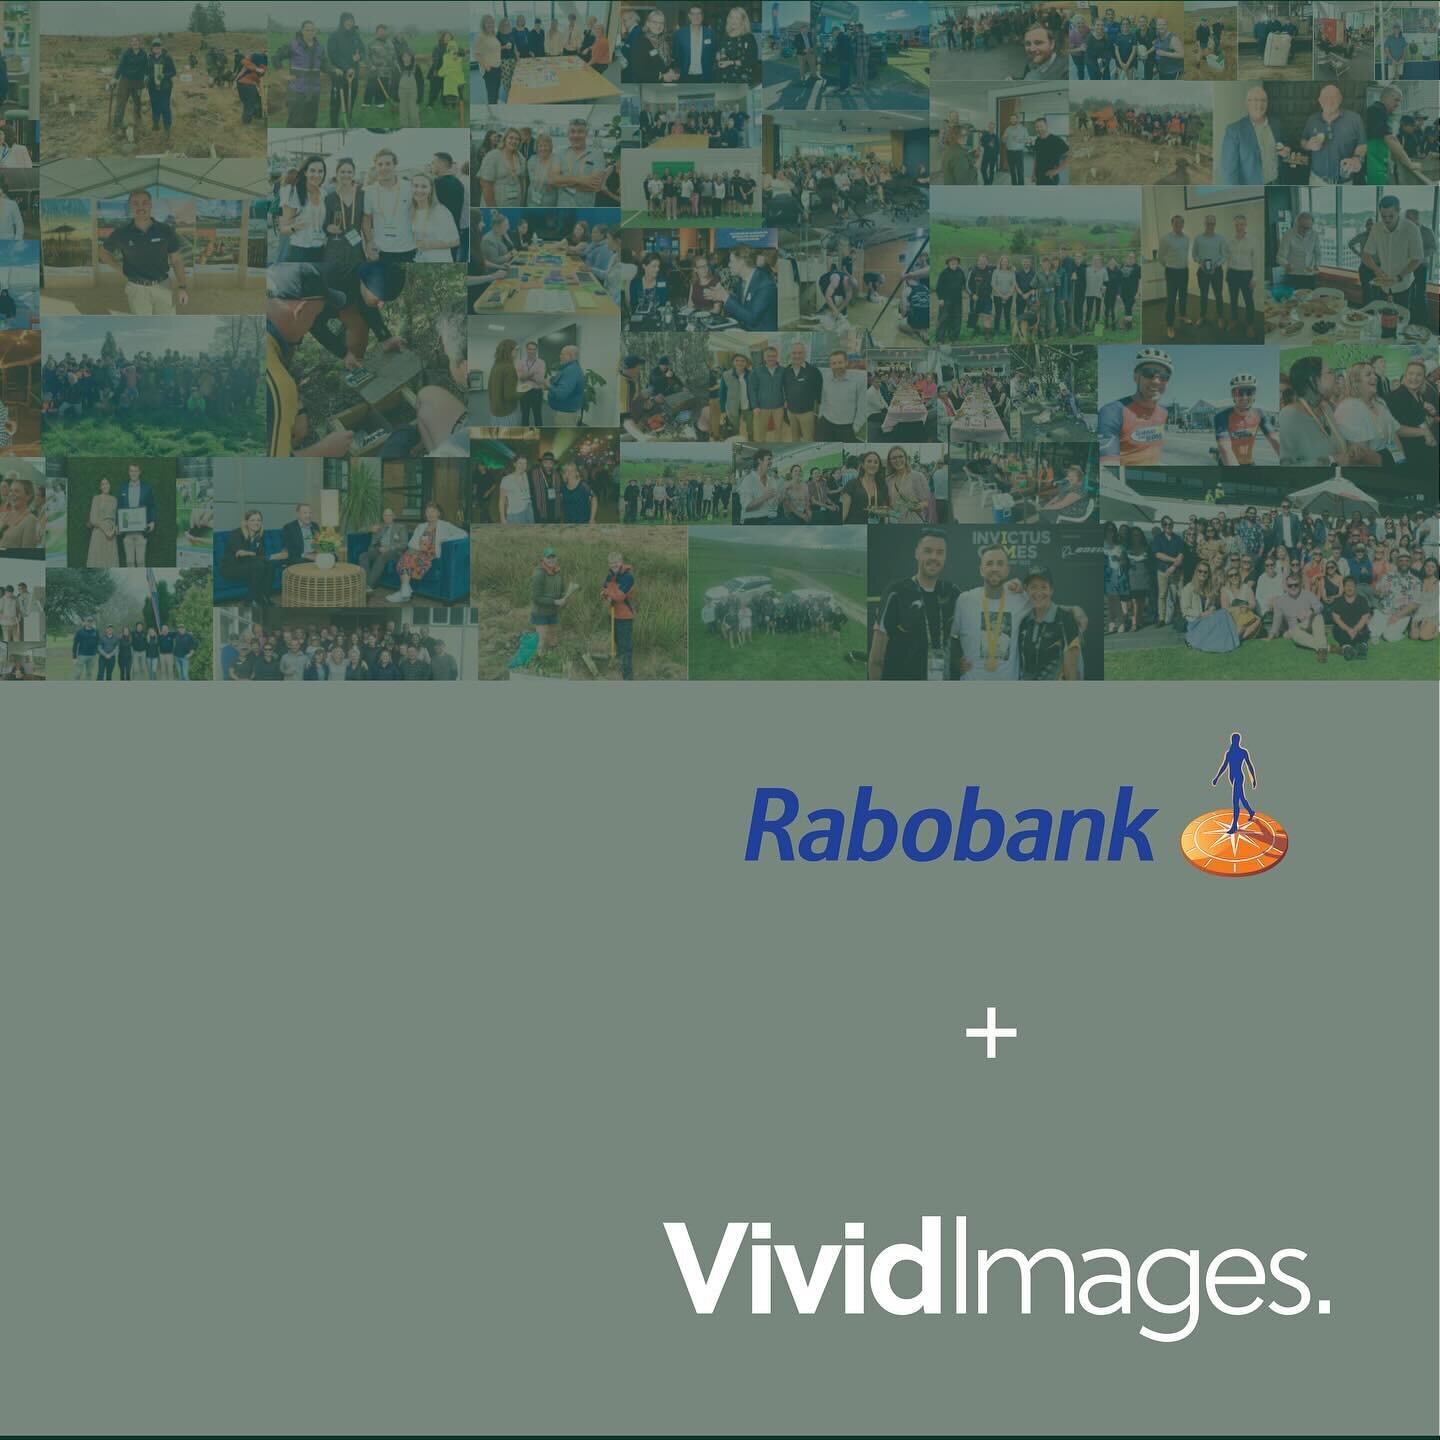 A great way to celebrate your people @rabobank_nz. Printed on photo text, easily removable and adjustable which leaves no damage when removed. #weprintedthisnz #vividimagesnz